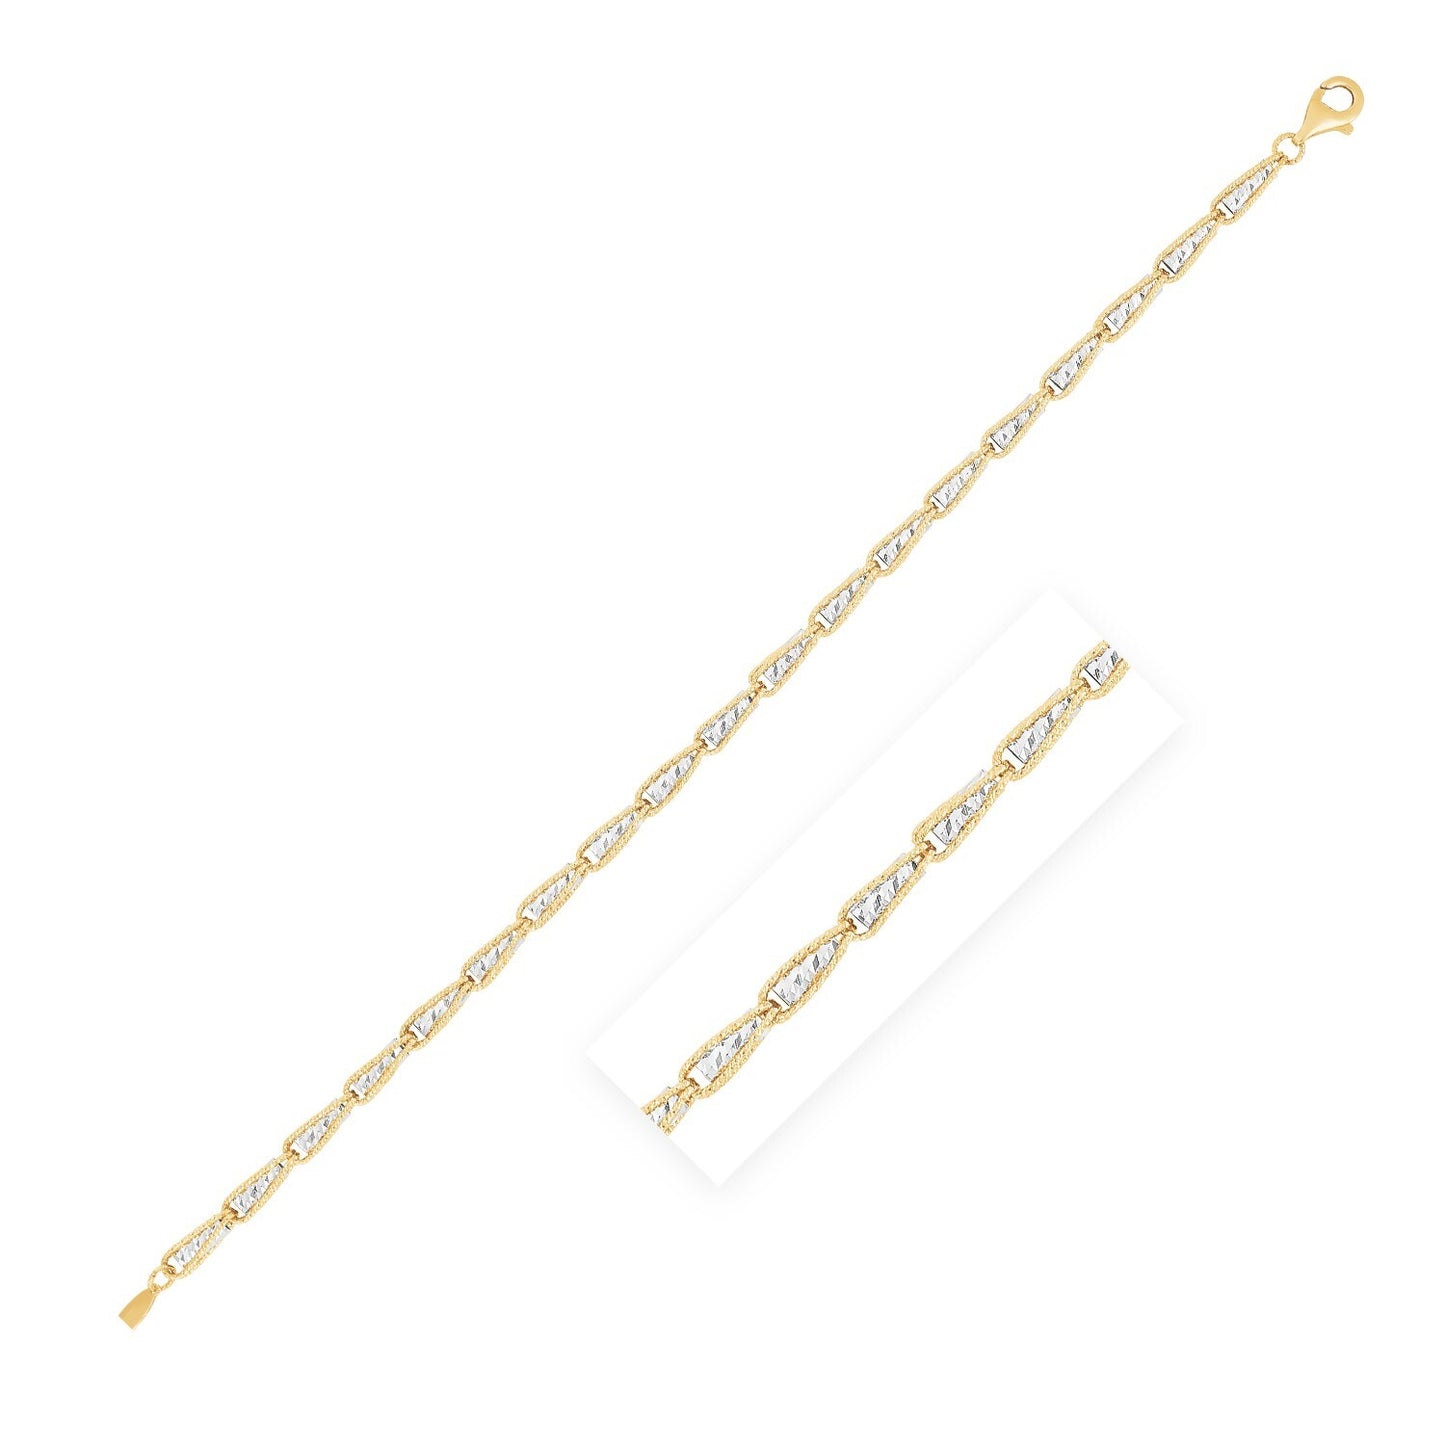 This 14k Women's Two Tone Gold High Polish Diamond Cut Link Chain Bracelet is a timeless classic. Measuring 3.2mm width and 7 1/2in length, its gorgeous design and luxurious diamond cut finish make this bracelet sparkle with elegance. With a lobster clasp closure, you can trust it to stay secure in place. A perfect accessory for any occasion.